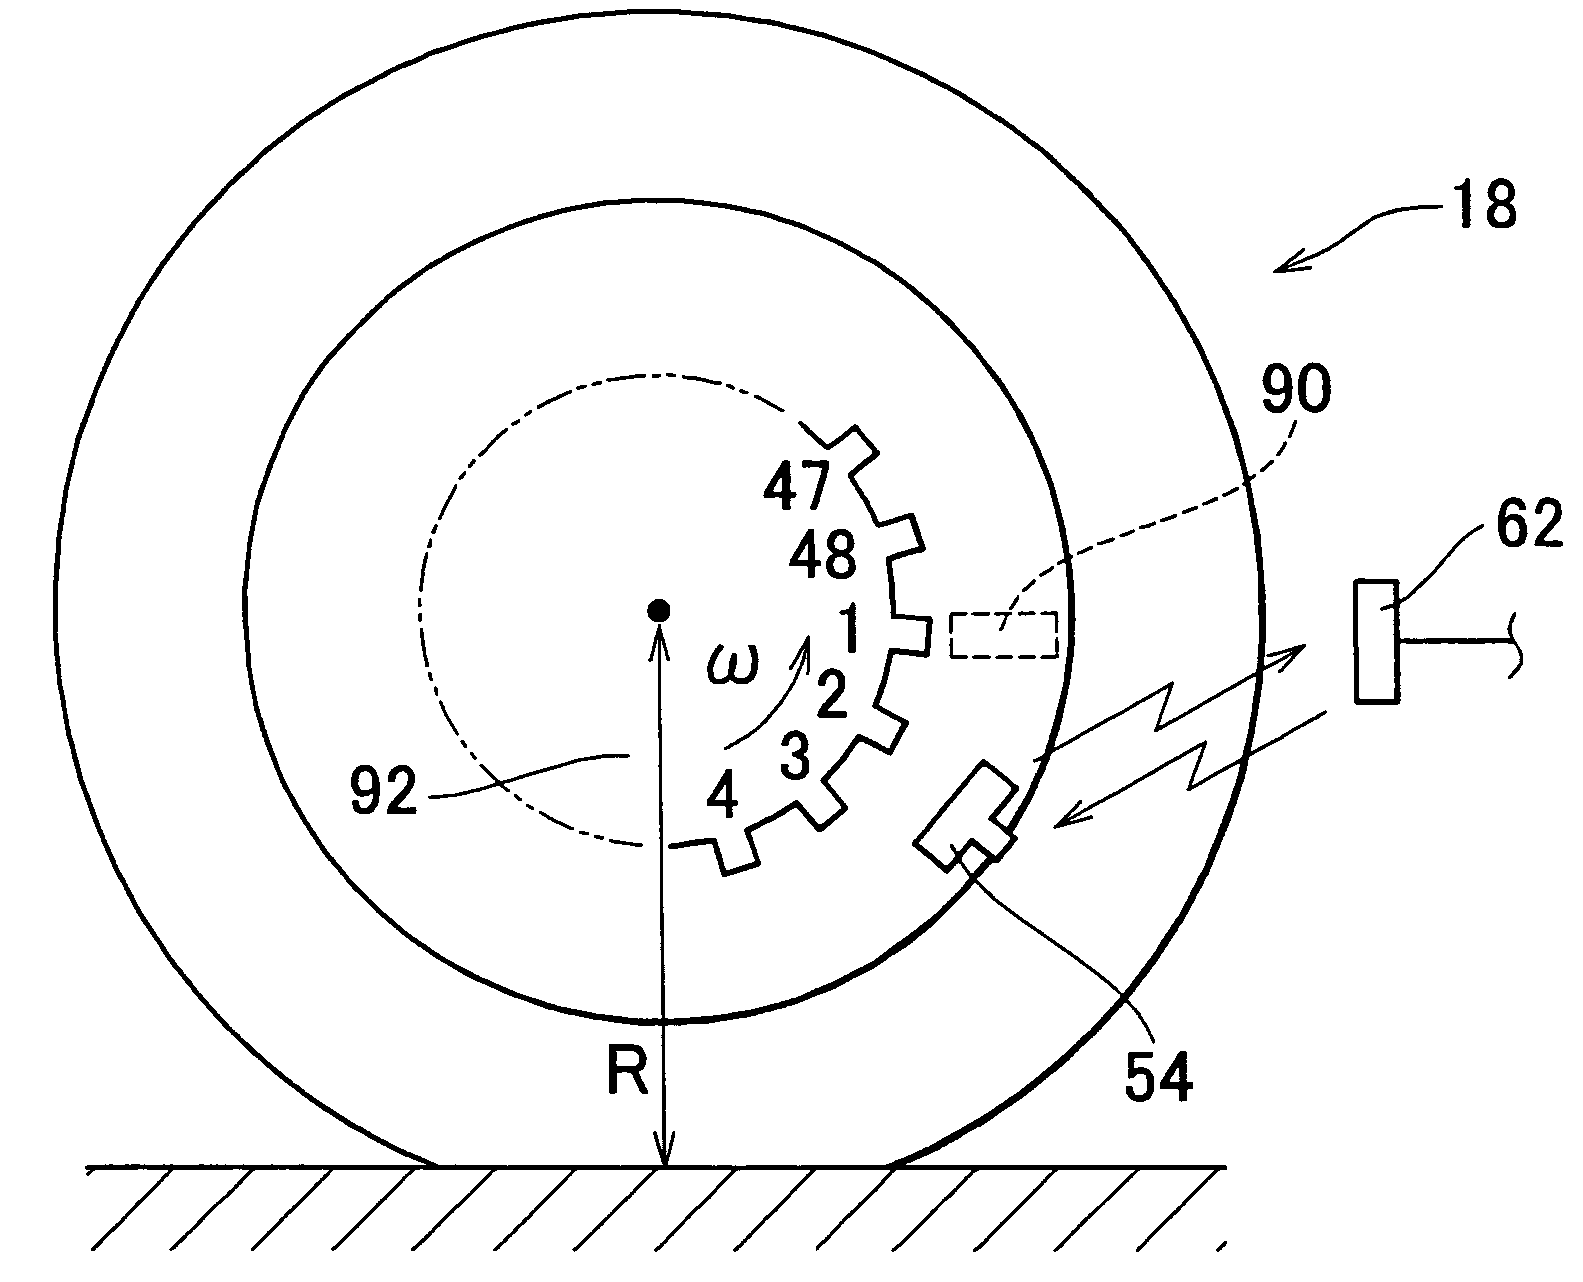 Communication system and method for communicating between a tire/wheel assembly and a vehicle body